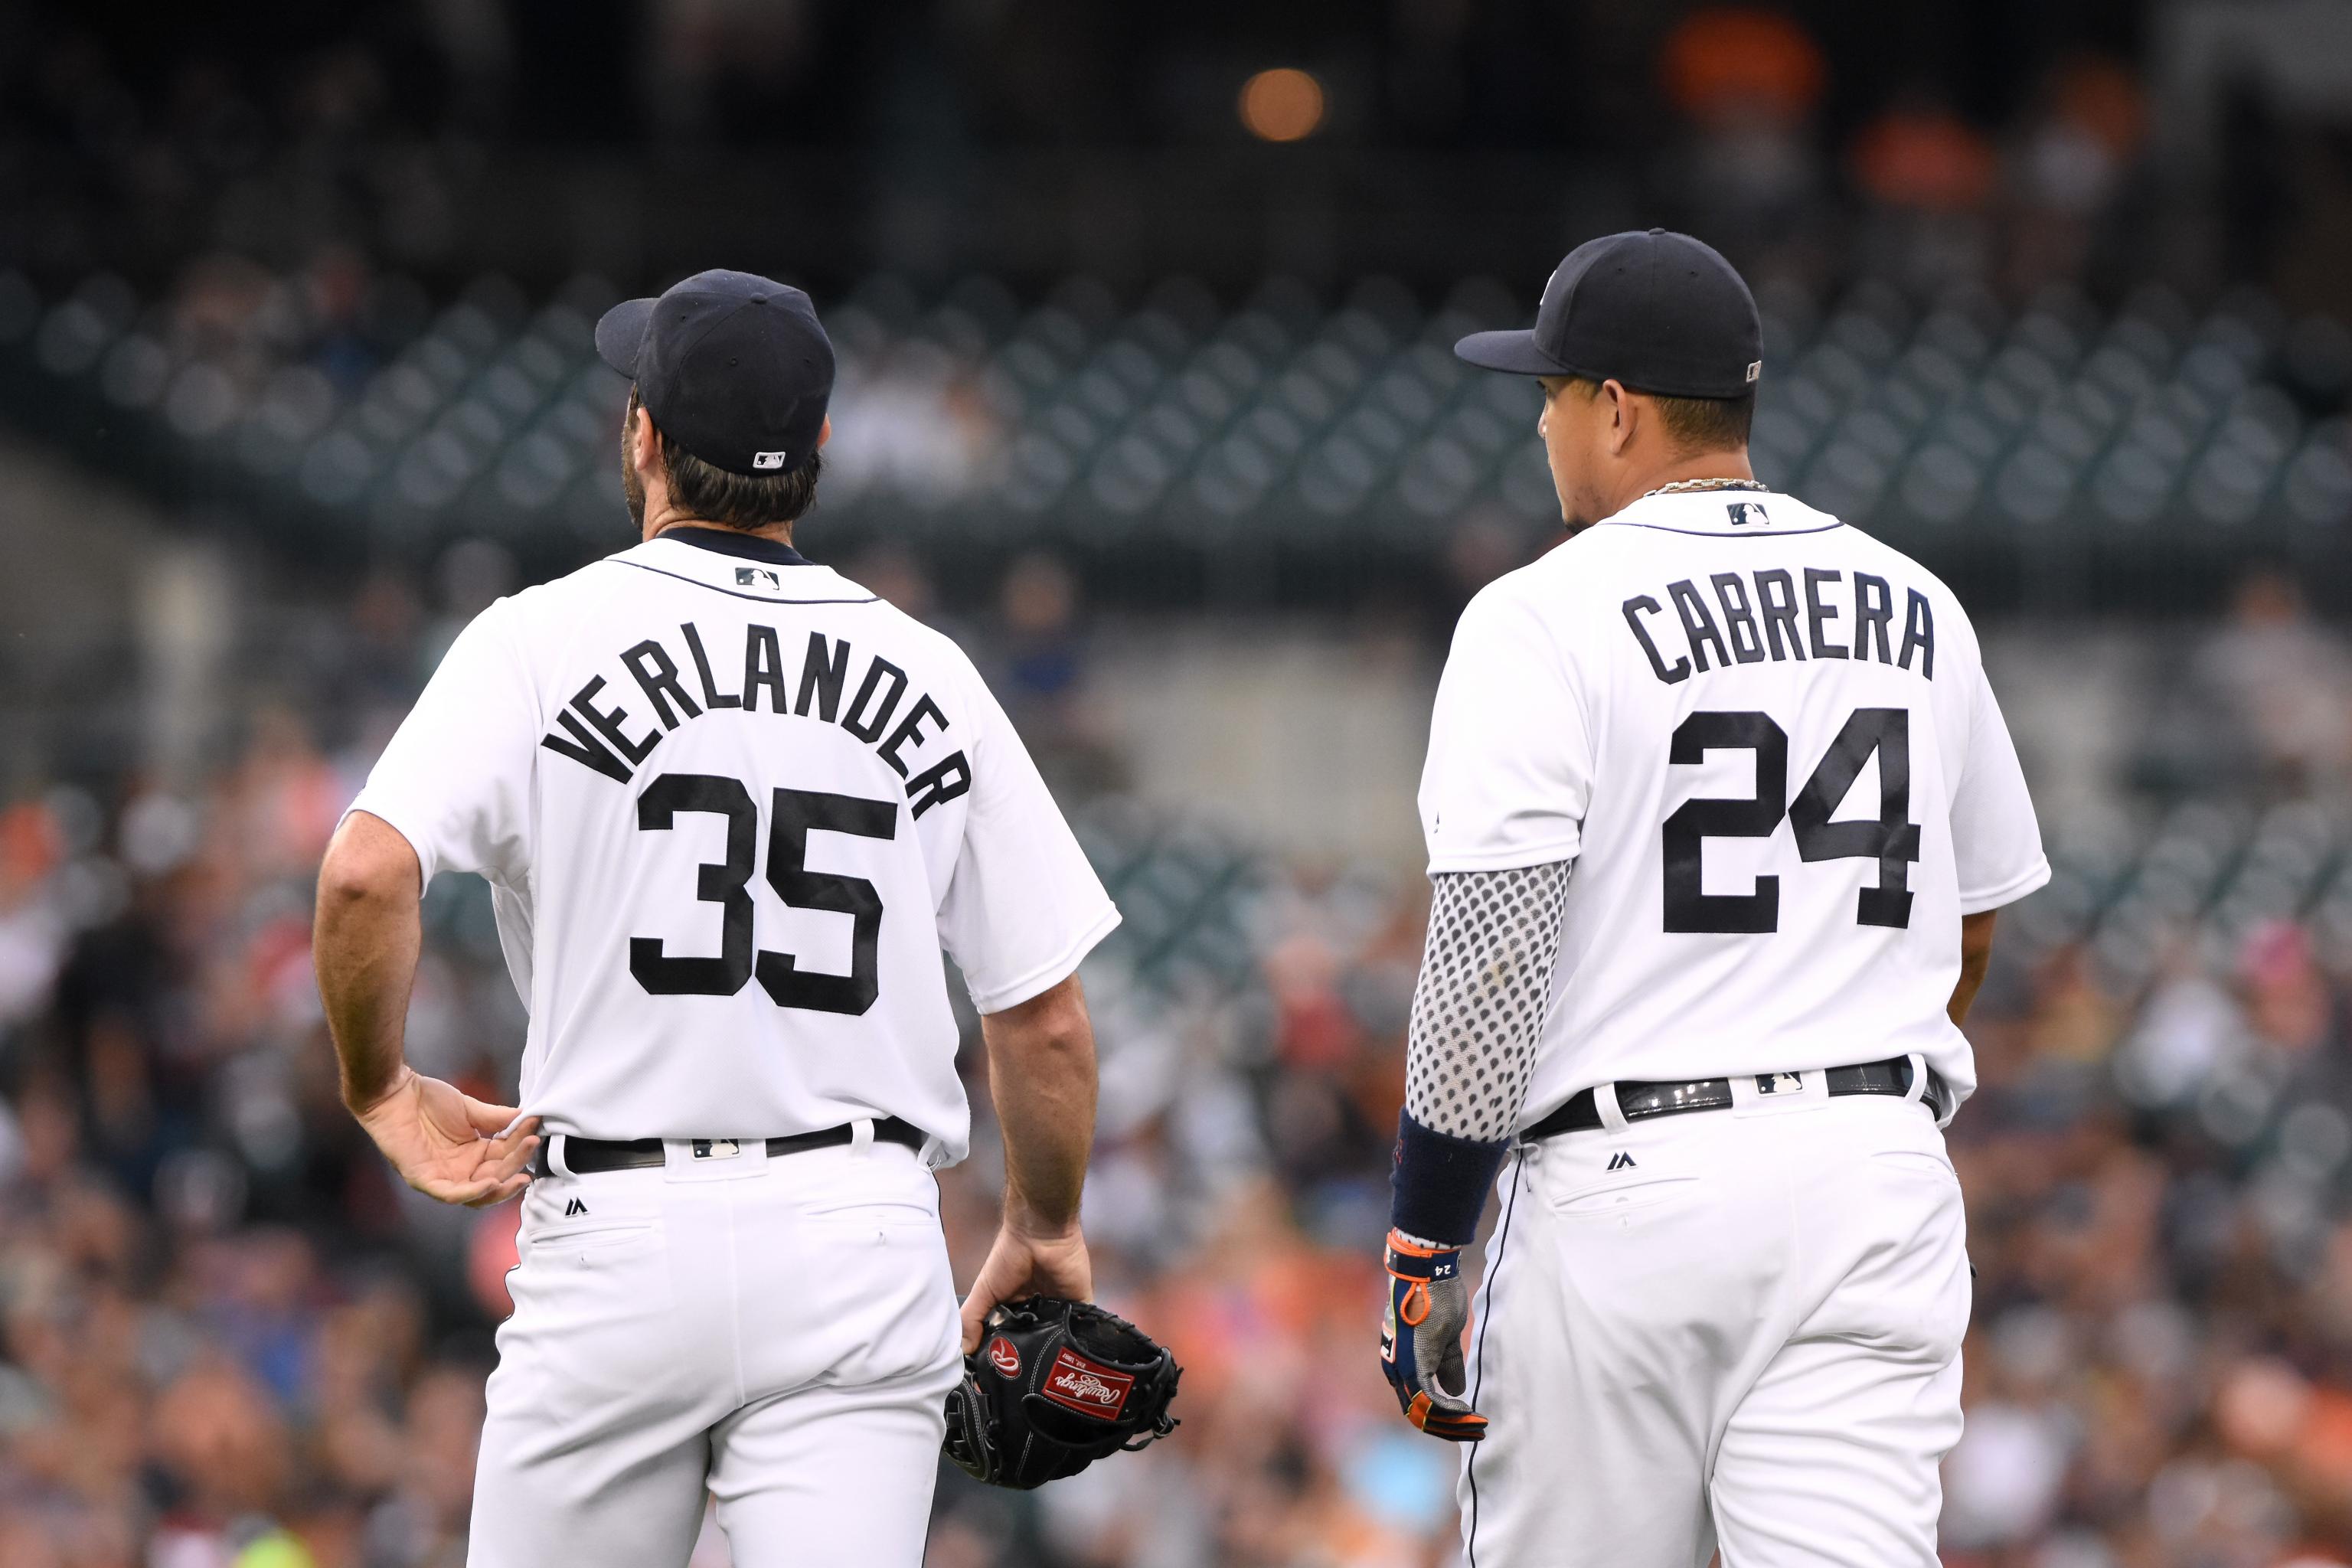 Tigers turn to Justin Verlander after Game 2 collapse